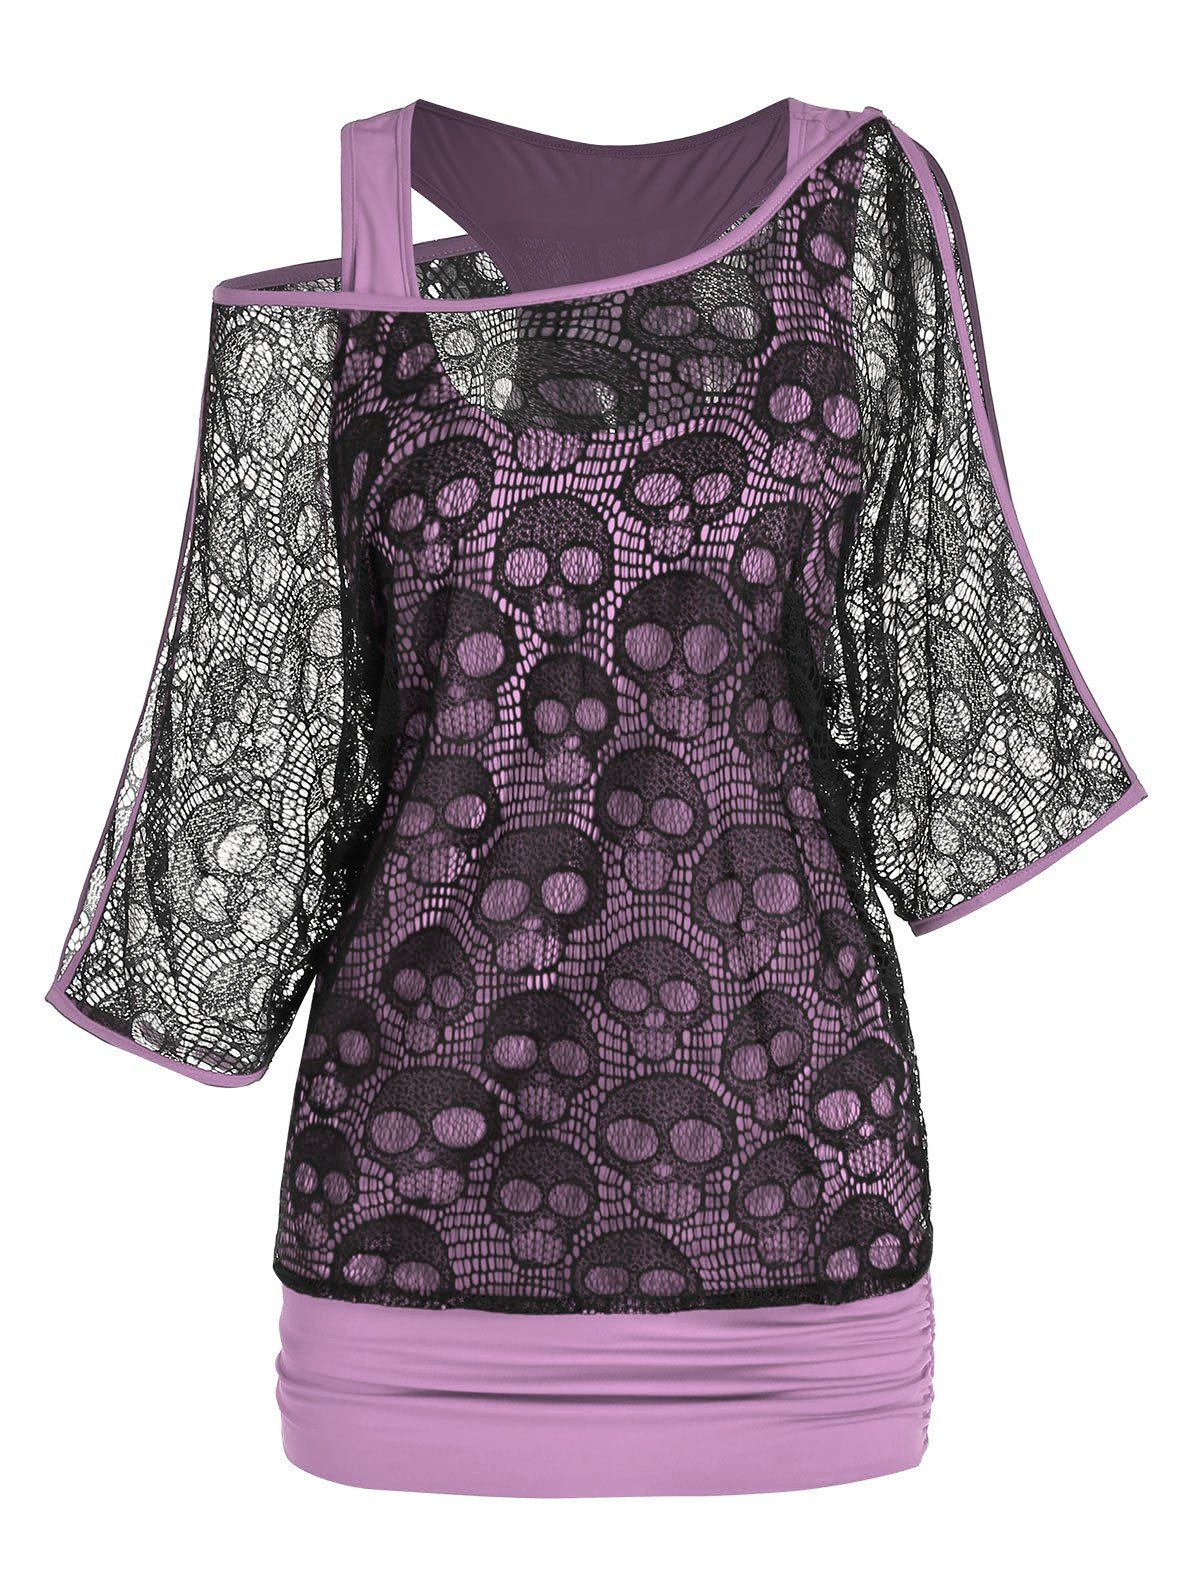 Skull Lace Insert Faux Twinset Top - LIGHT PINK 3XL